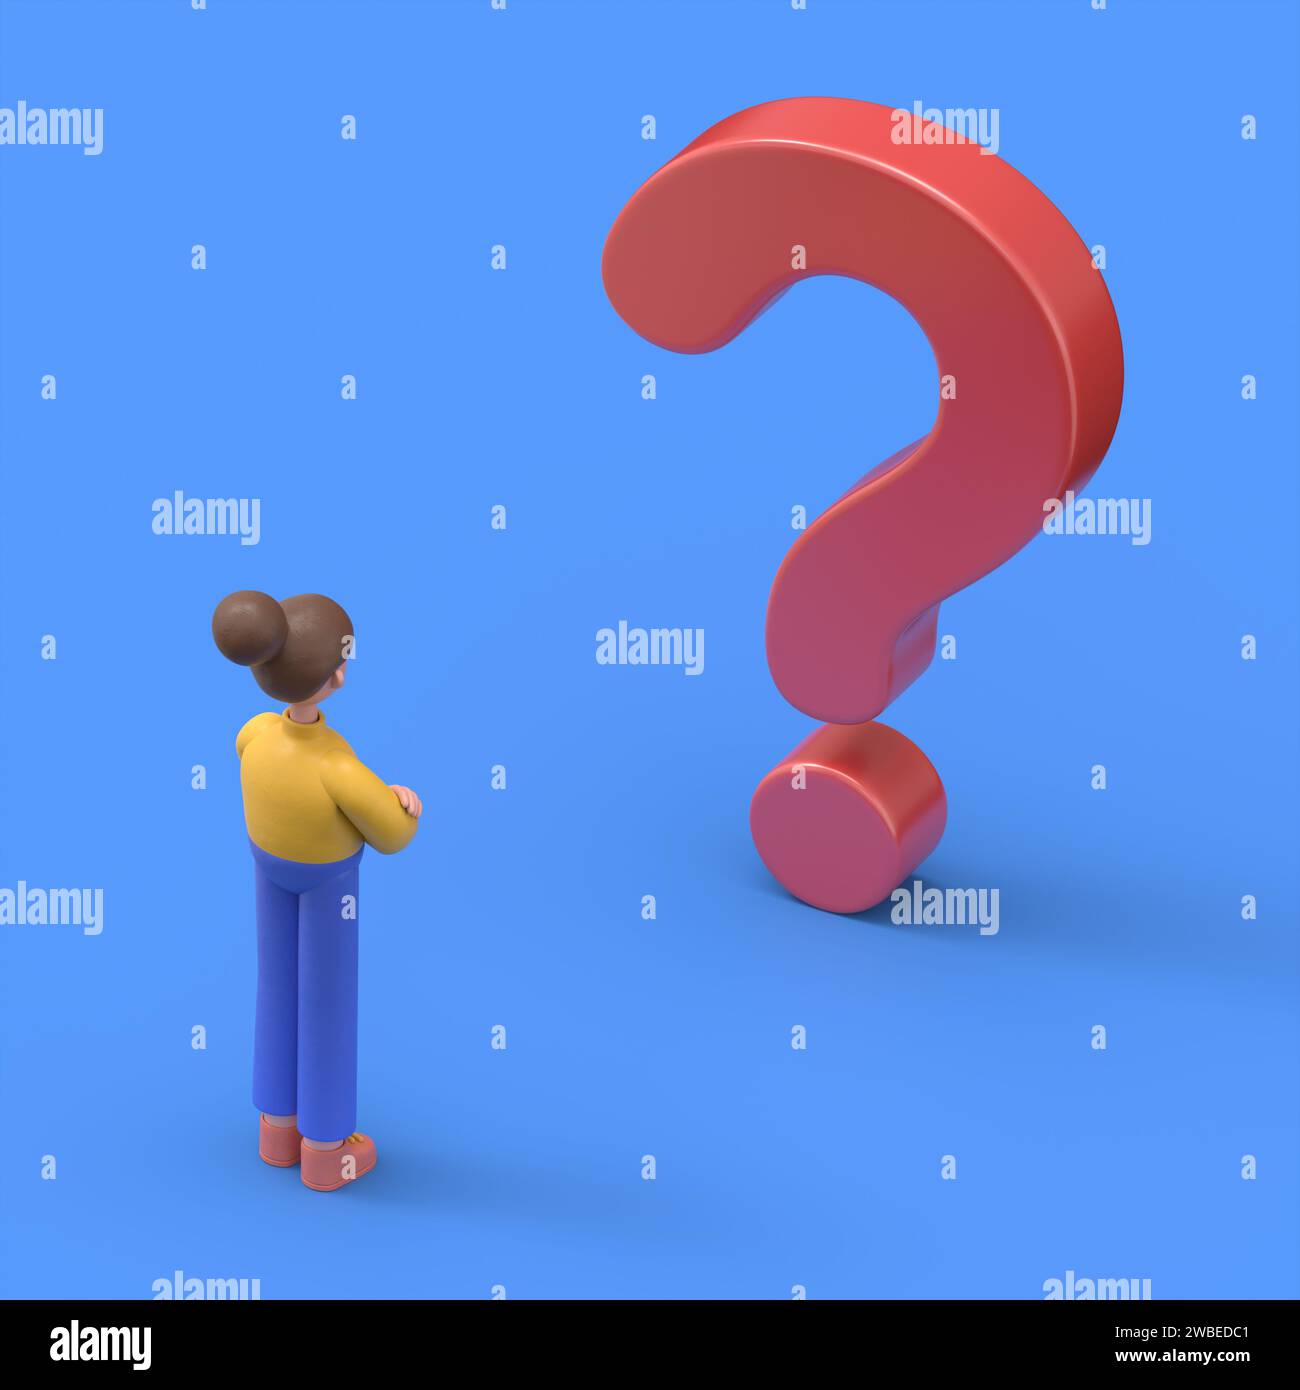 3D illustration of Asian man Felix faces a big red question mark, solution to a problem or task.3D rendering on blue background. Stock Photo